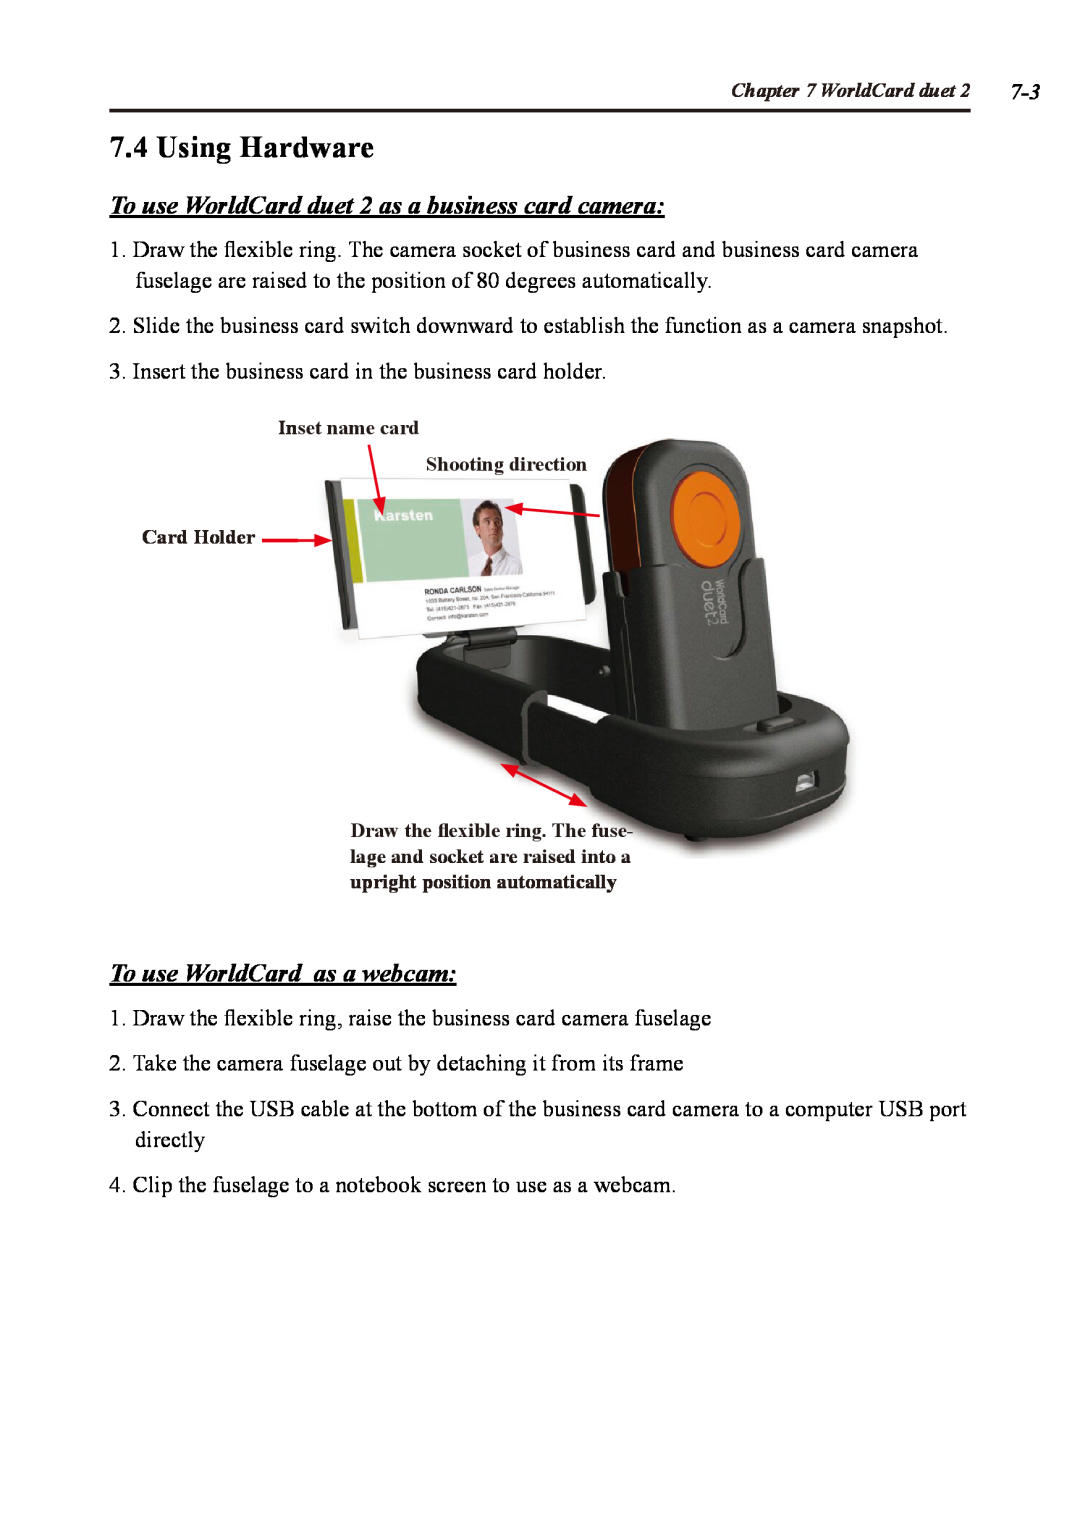 Penpower user manual Using Hardware, To use WorldCard duet 2 as a business card camera, To use WorldCard as a webcam 